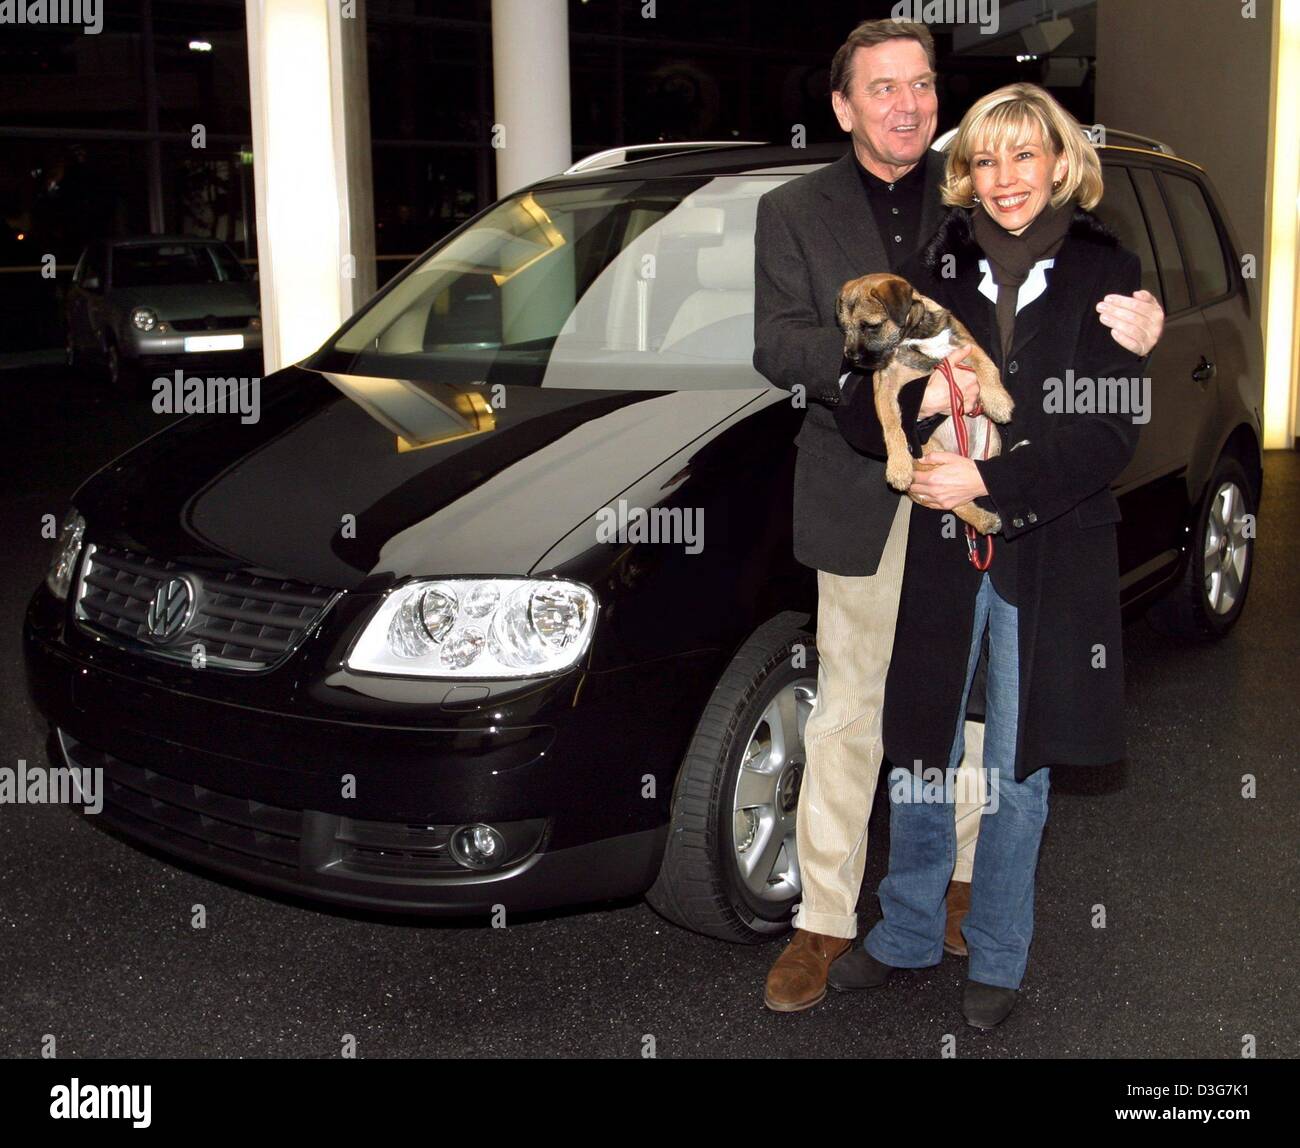 (dpa) - German chancellor Gerhard Schroeder and his wife Doris Schroeder-Koepf hold their terrier Holly in their arms and smile as they stand in front of their new VW Touran van at the delivery department of the VW assembly plant in Wolfsburg, Germany, 2 November 2003. Stock Photo